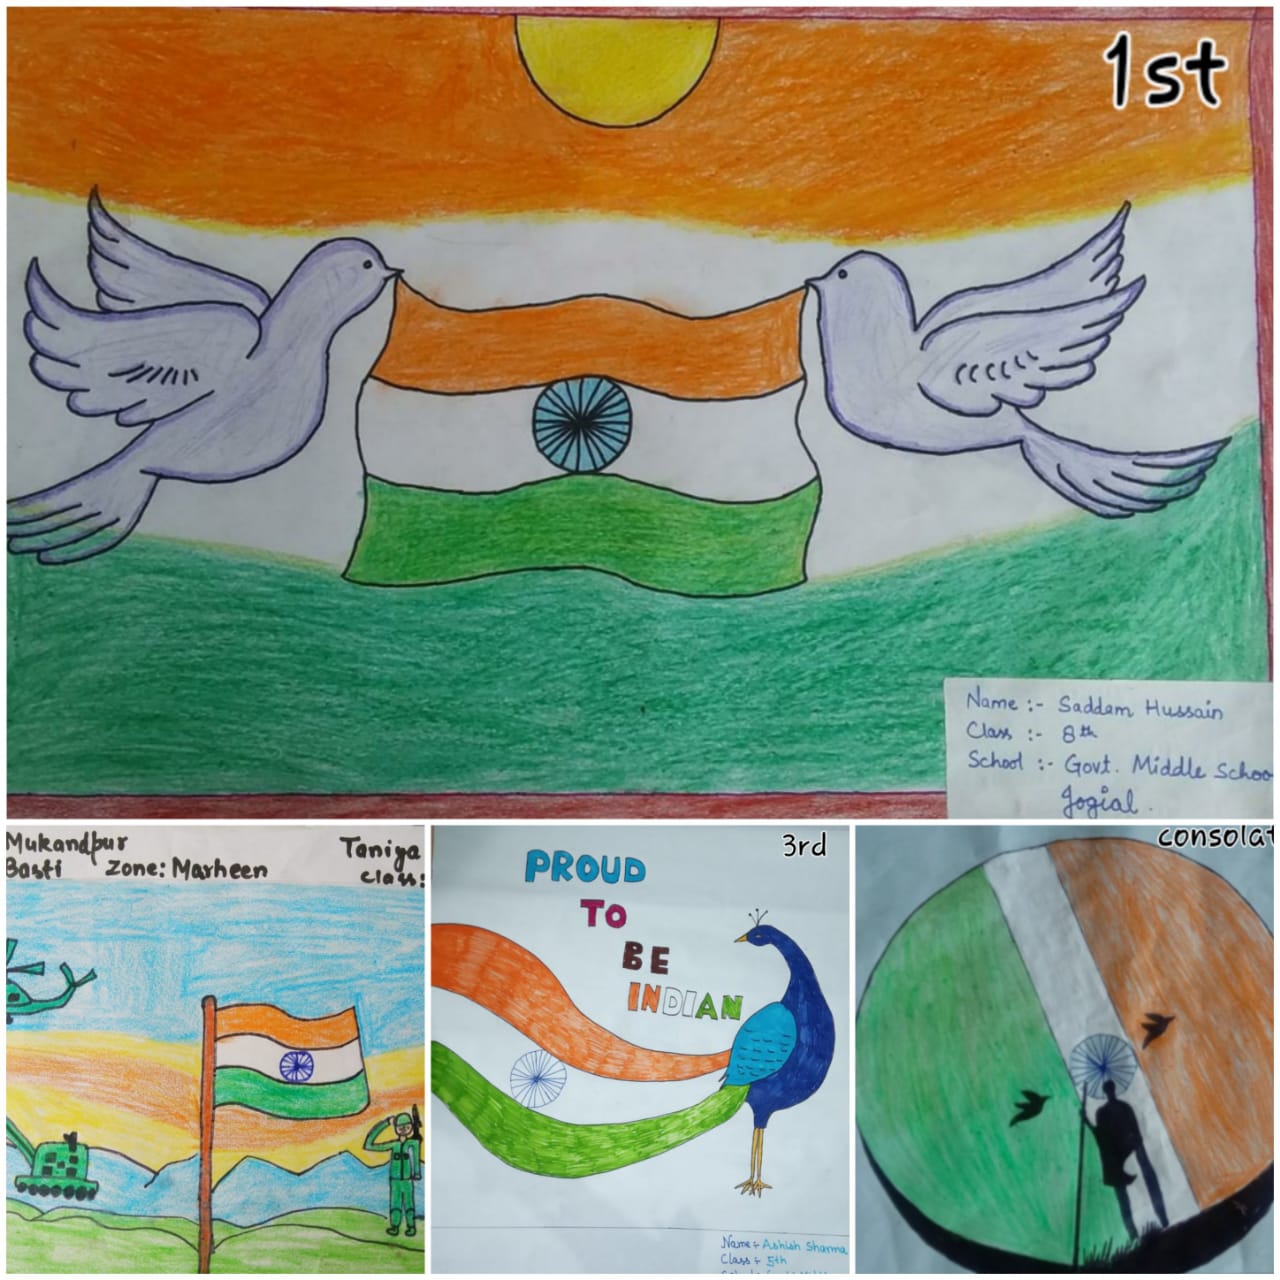 Independence Day FREE DRAWING COMPETITION